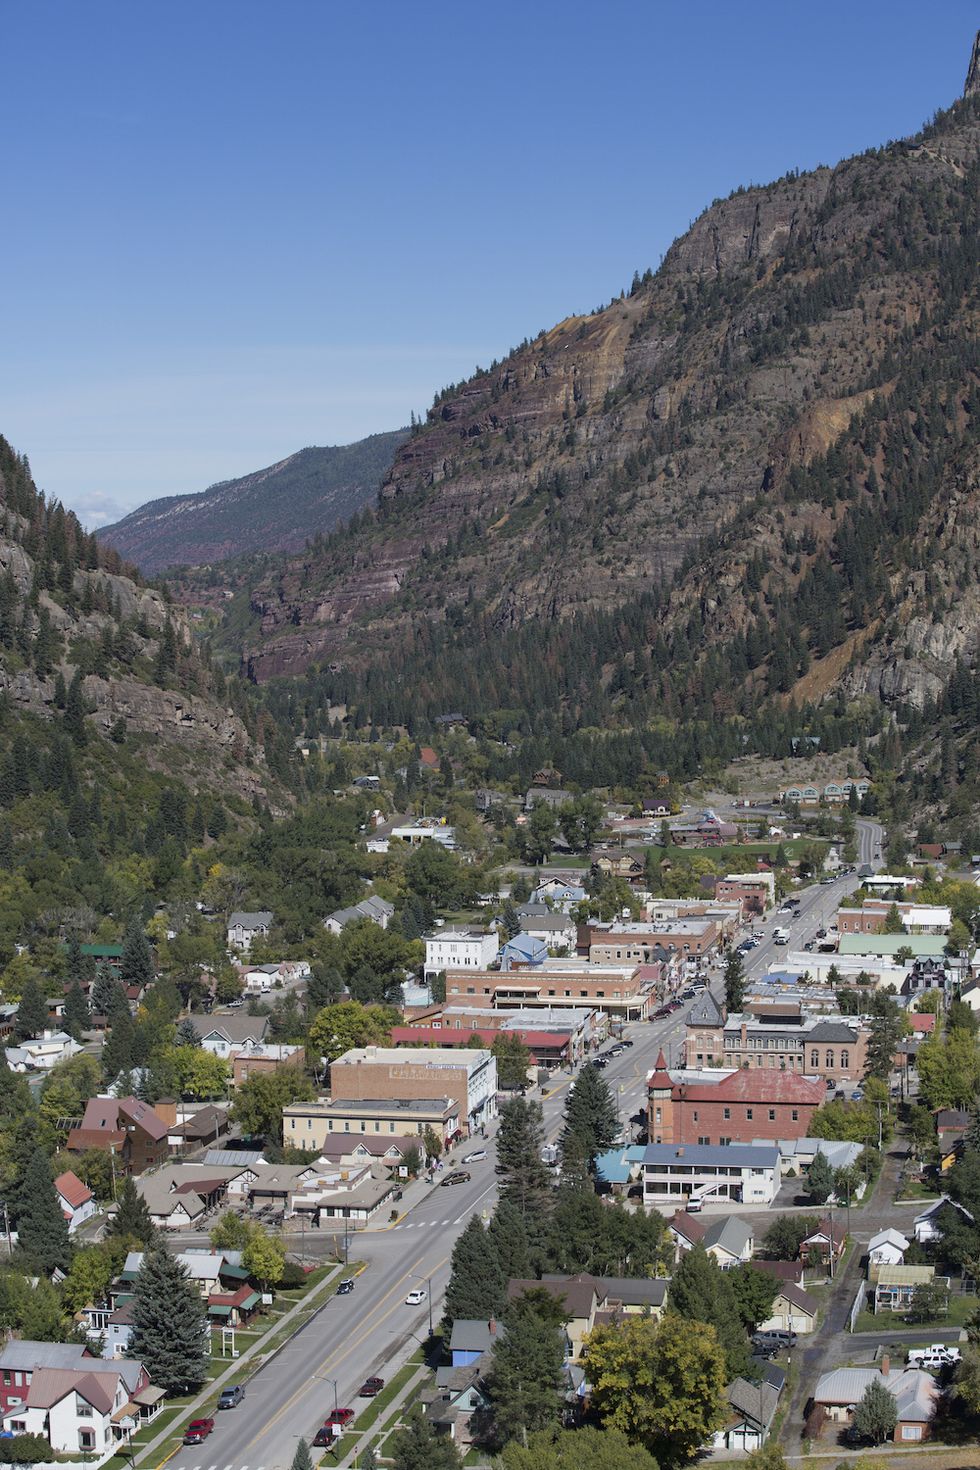 10 Best Small Towns in America - Prettiest Small Towns in America